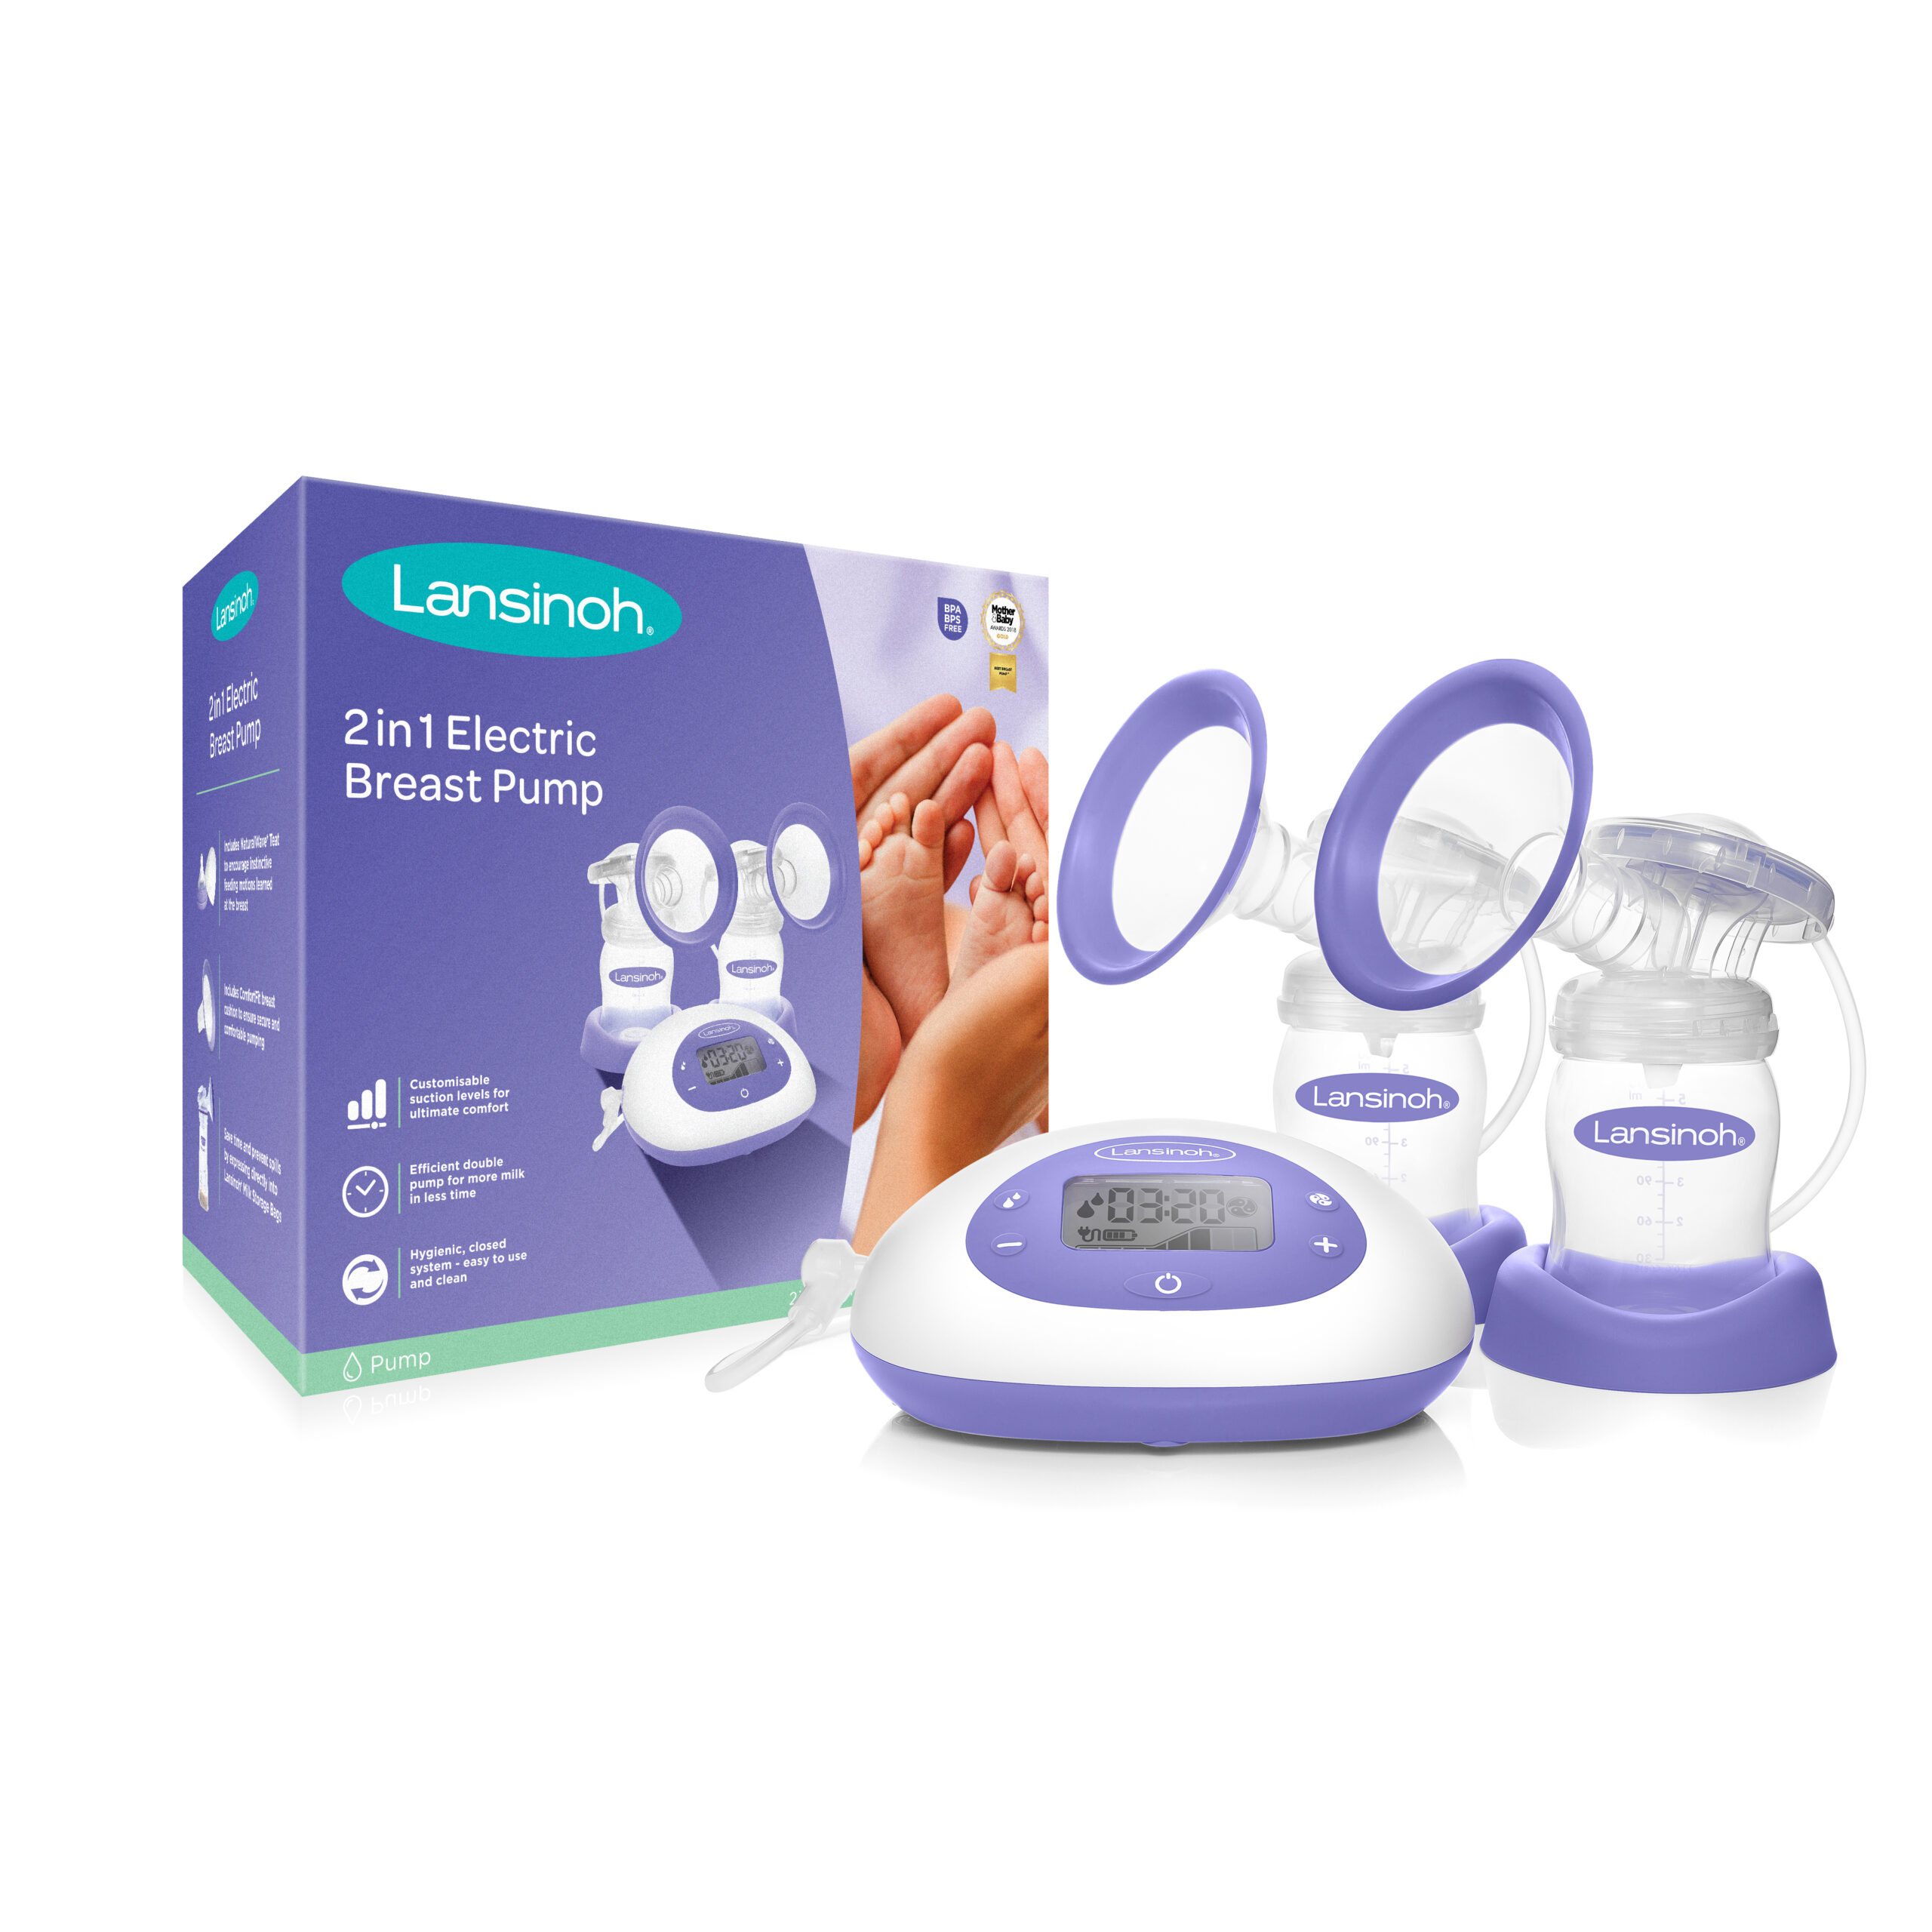 Packaging of the 2in1 Double Electric Breast Pump